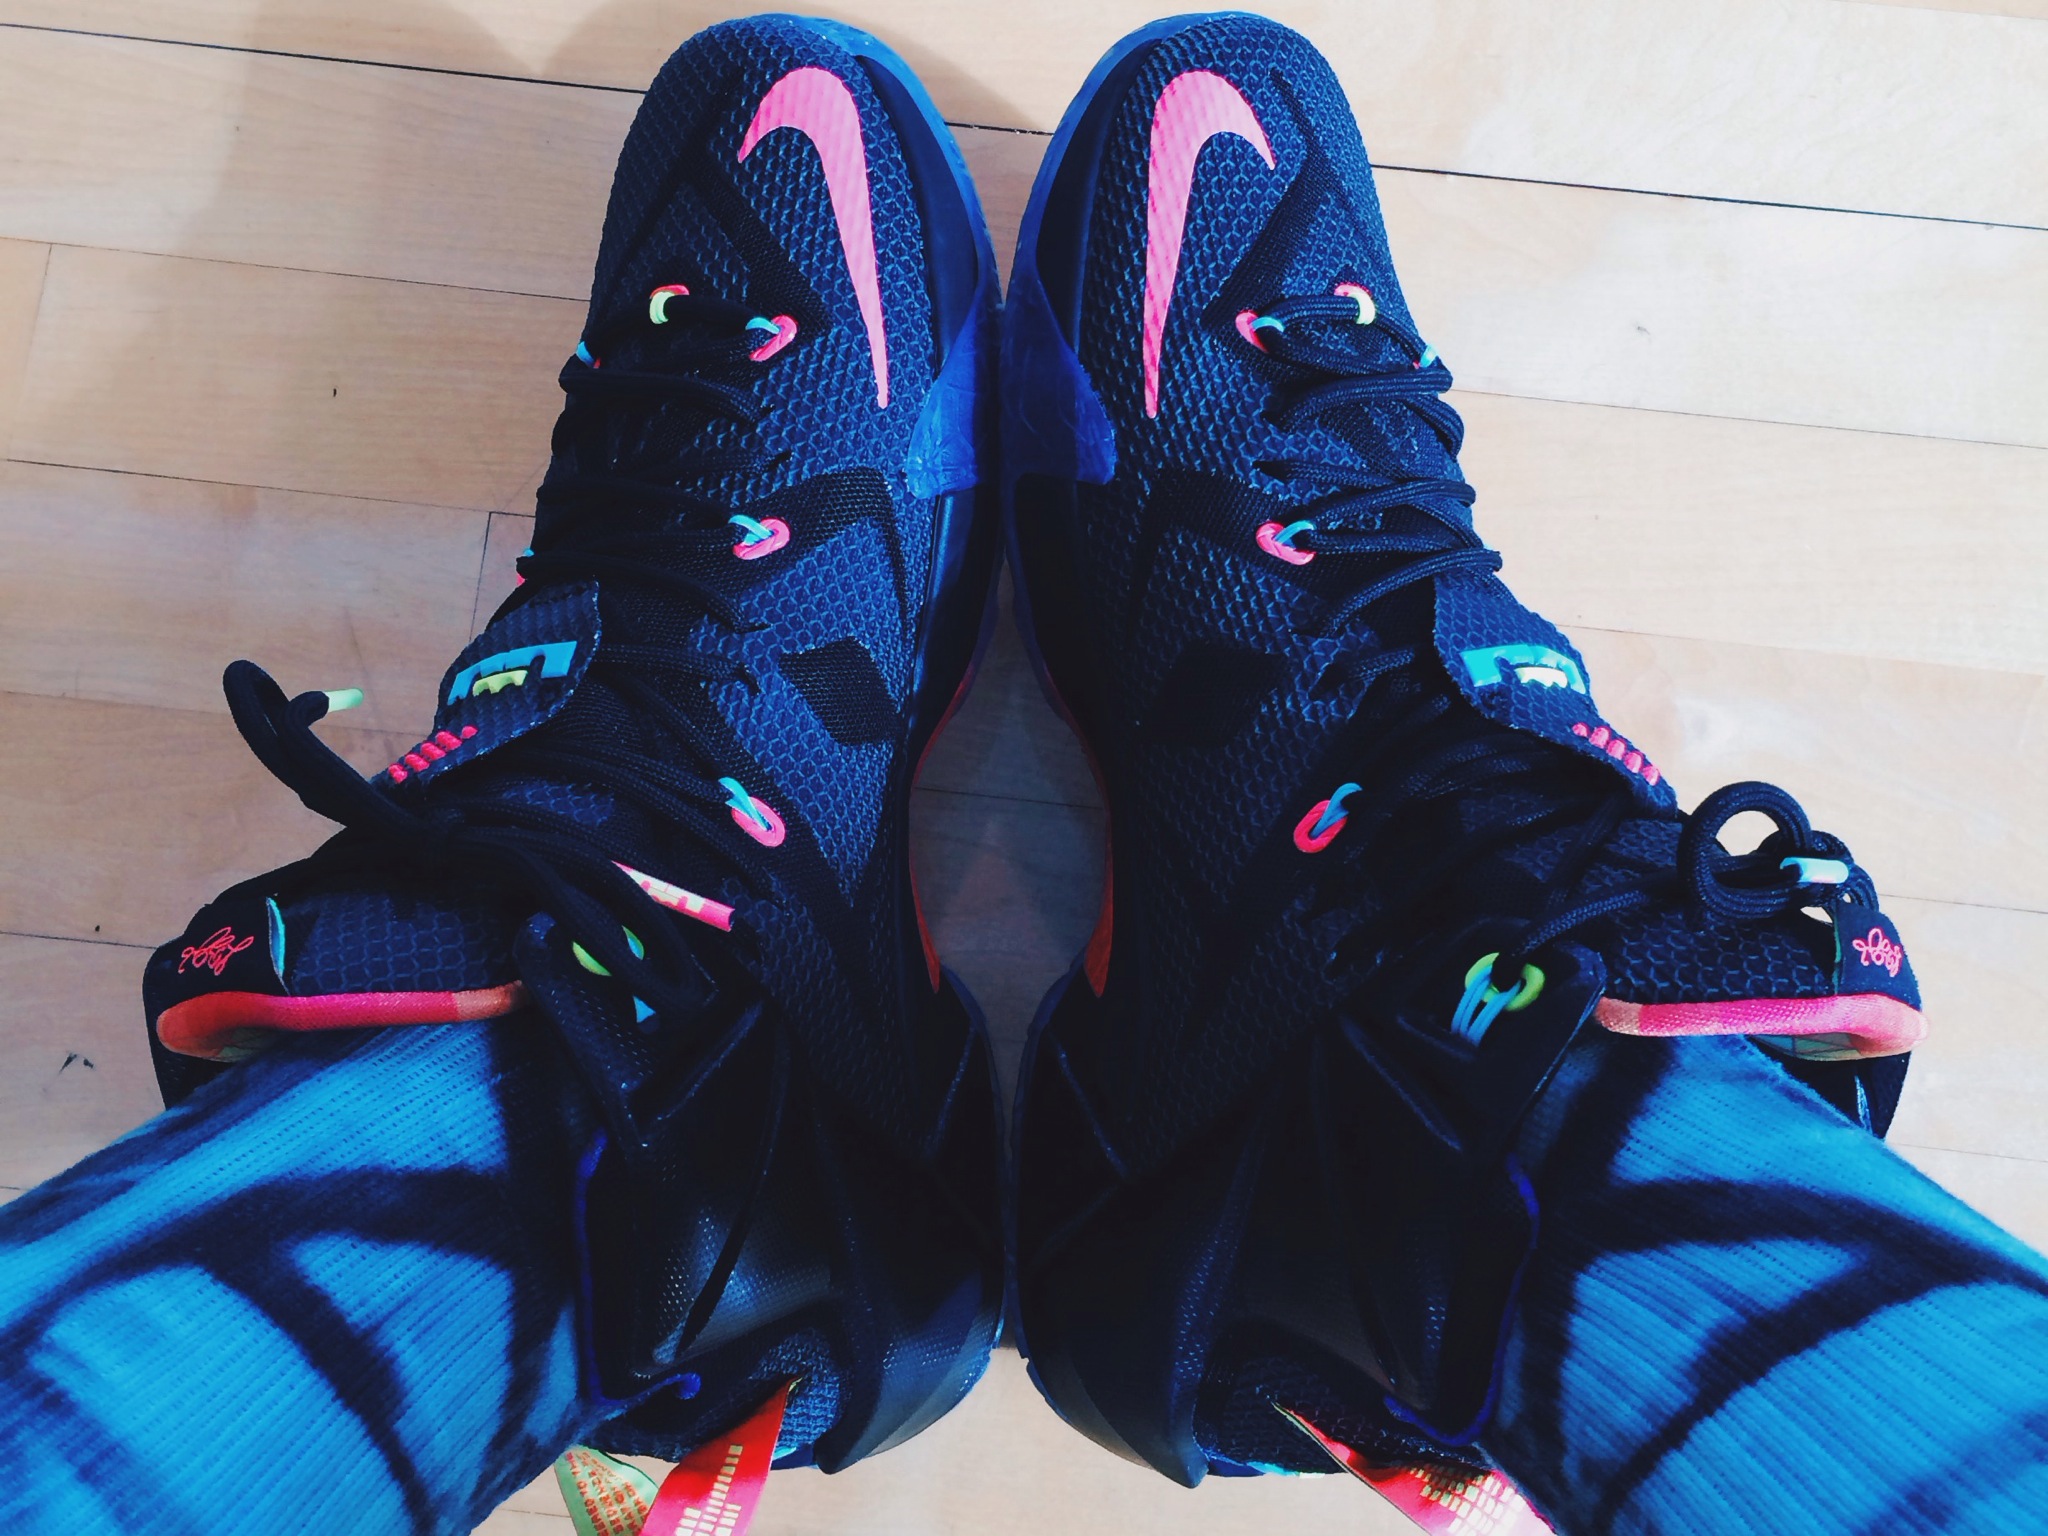 Nike Lebron 12 “Data” – Another Look